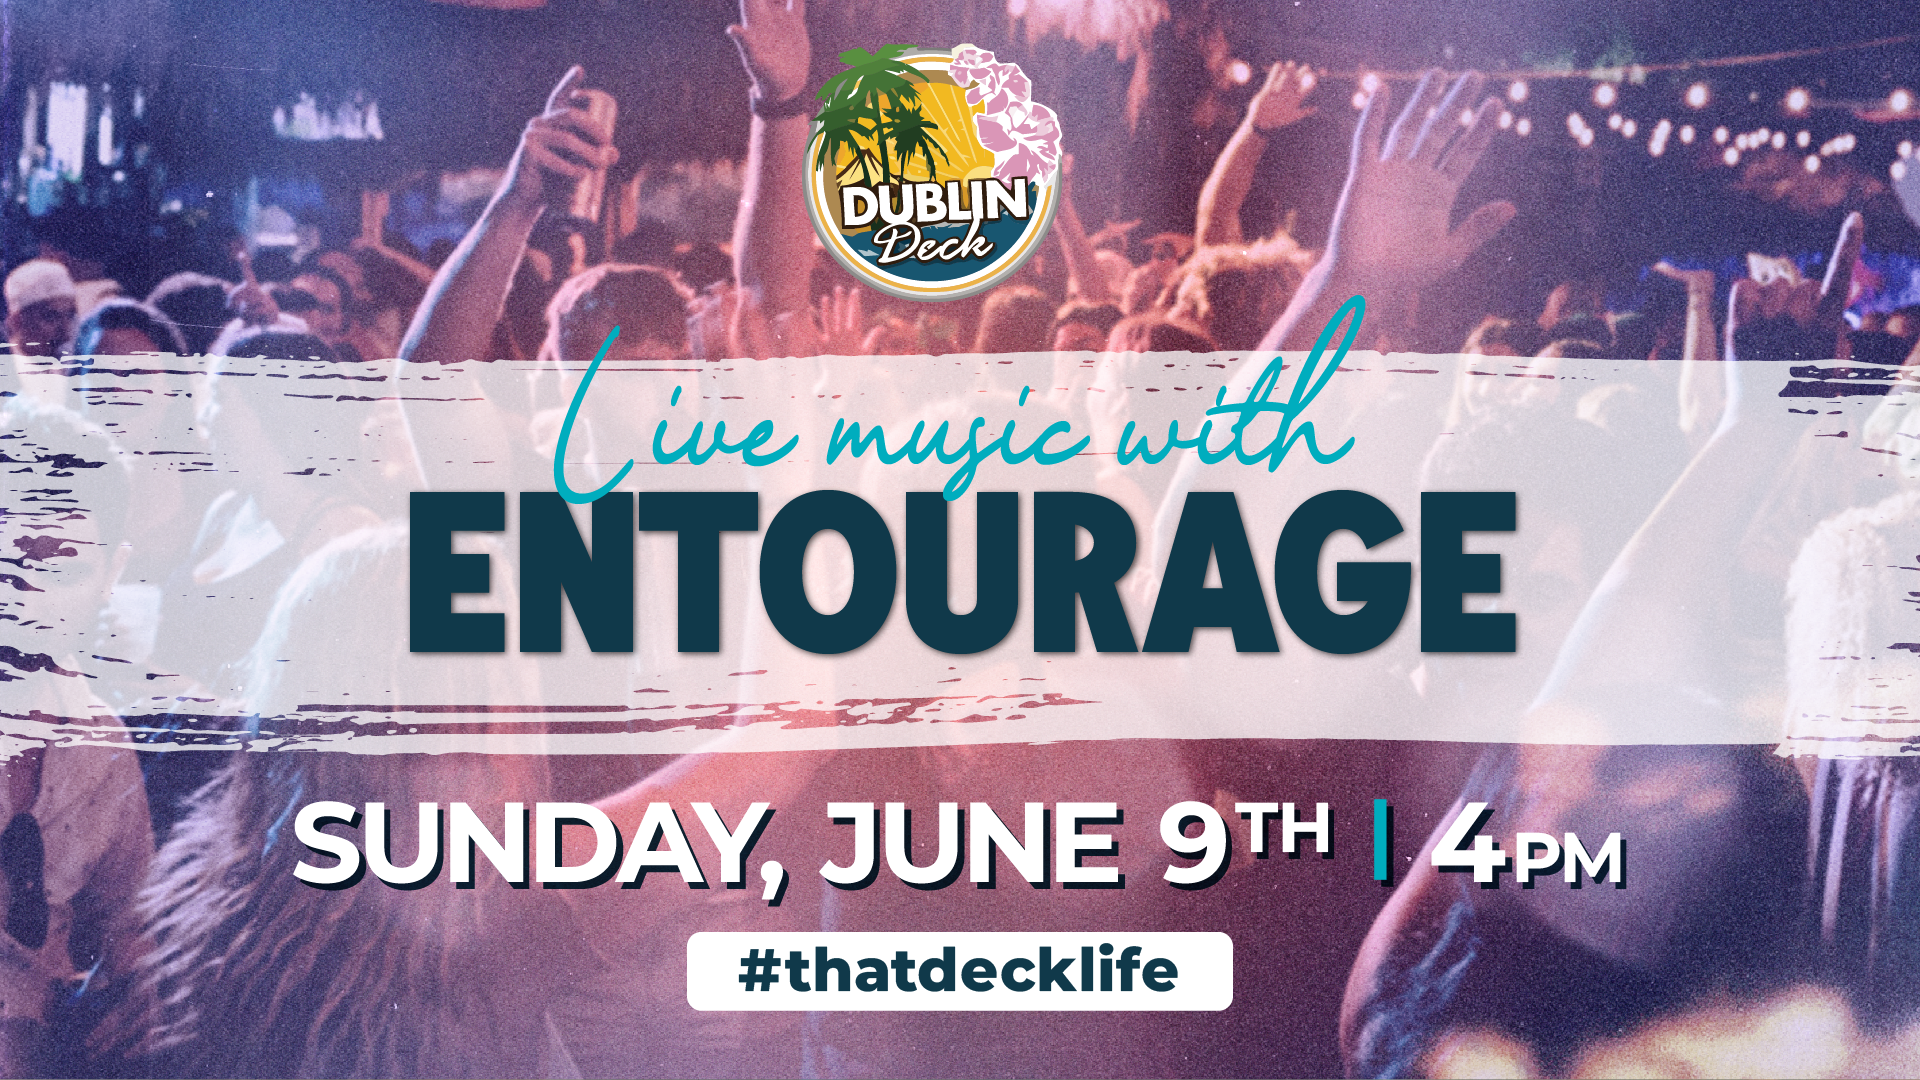 flyer for live music by entourage on june 9 at 4pm